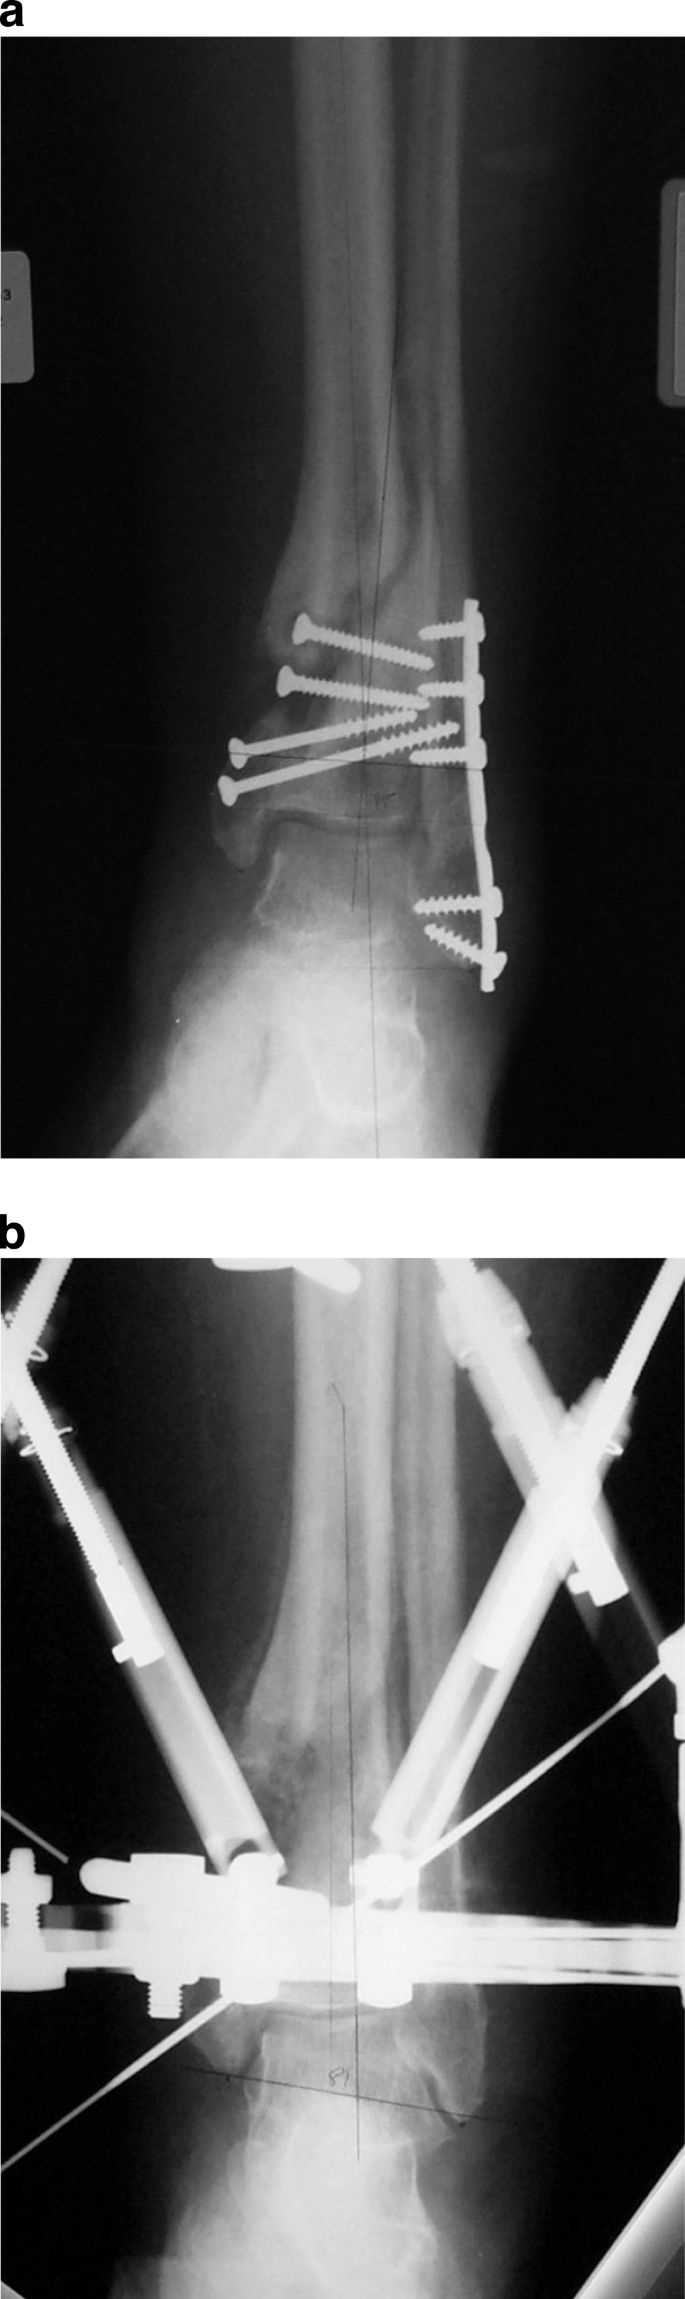 Posttraumatic Reconstruction of the Ankle Using the Ilizarov